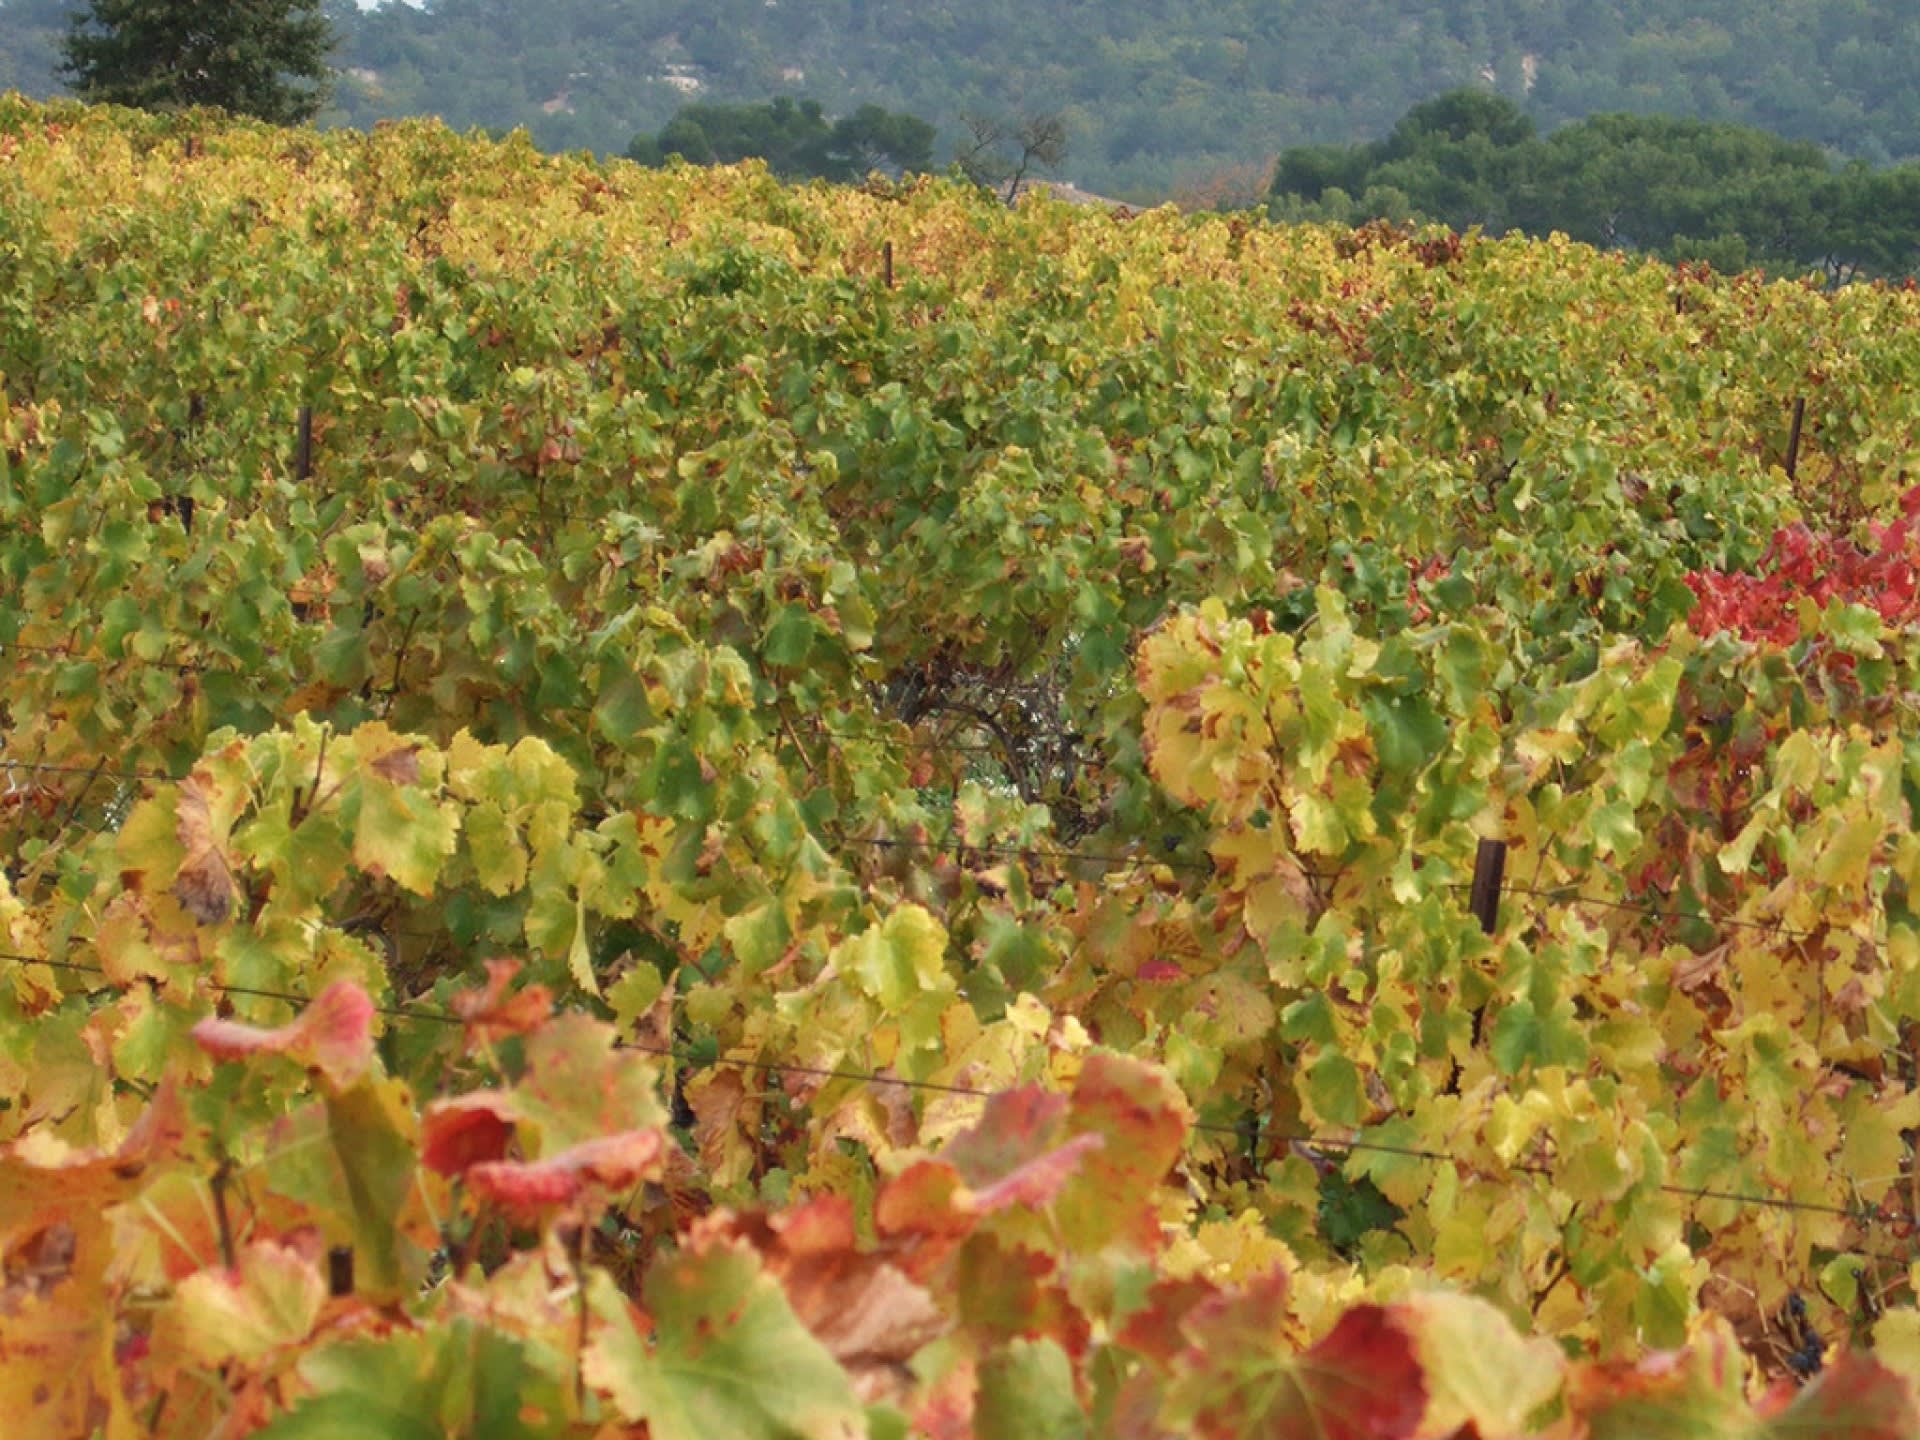 Culture and Wine in Chateauneuf-du-Pape